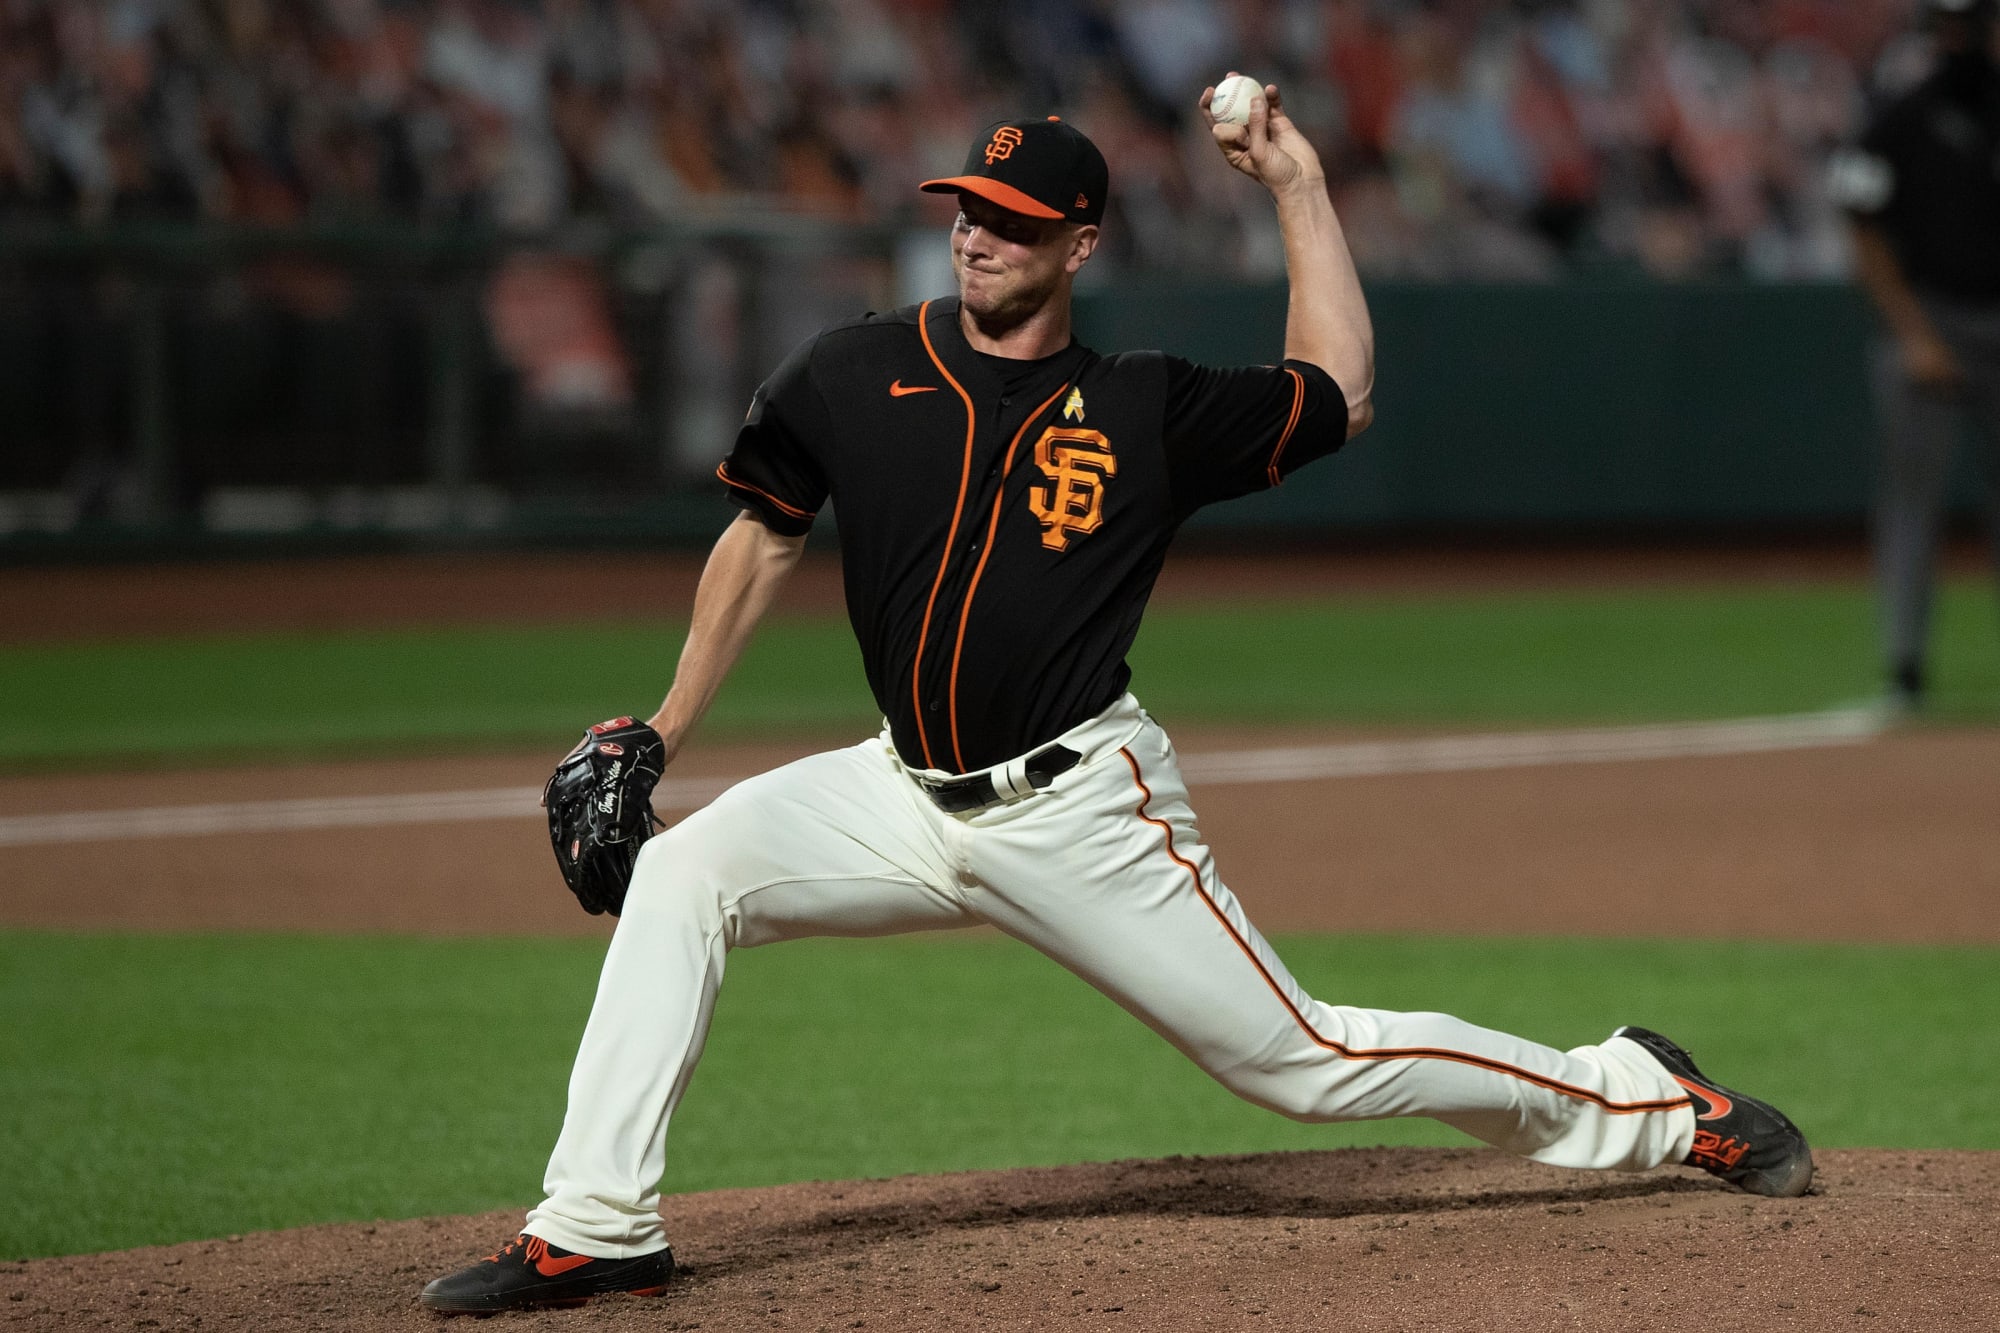 SF Giants deploying a closer-by-committee approach to success